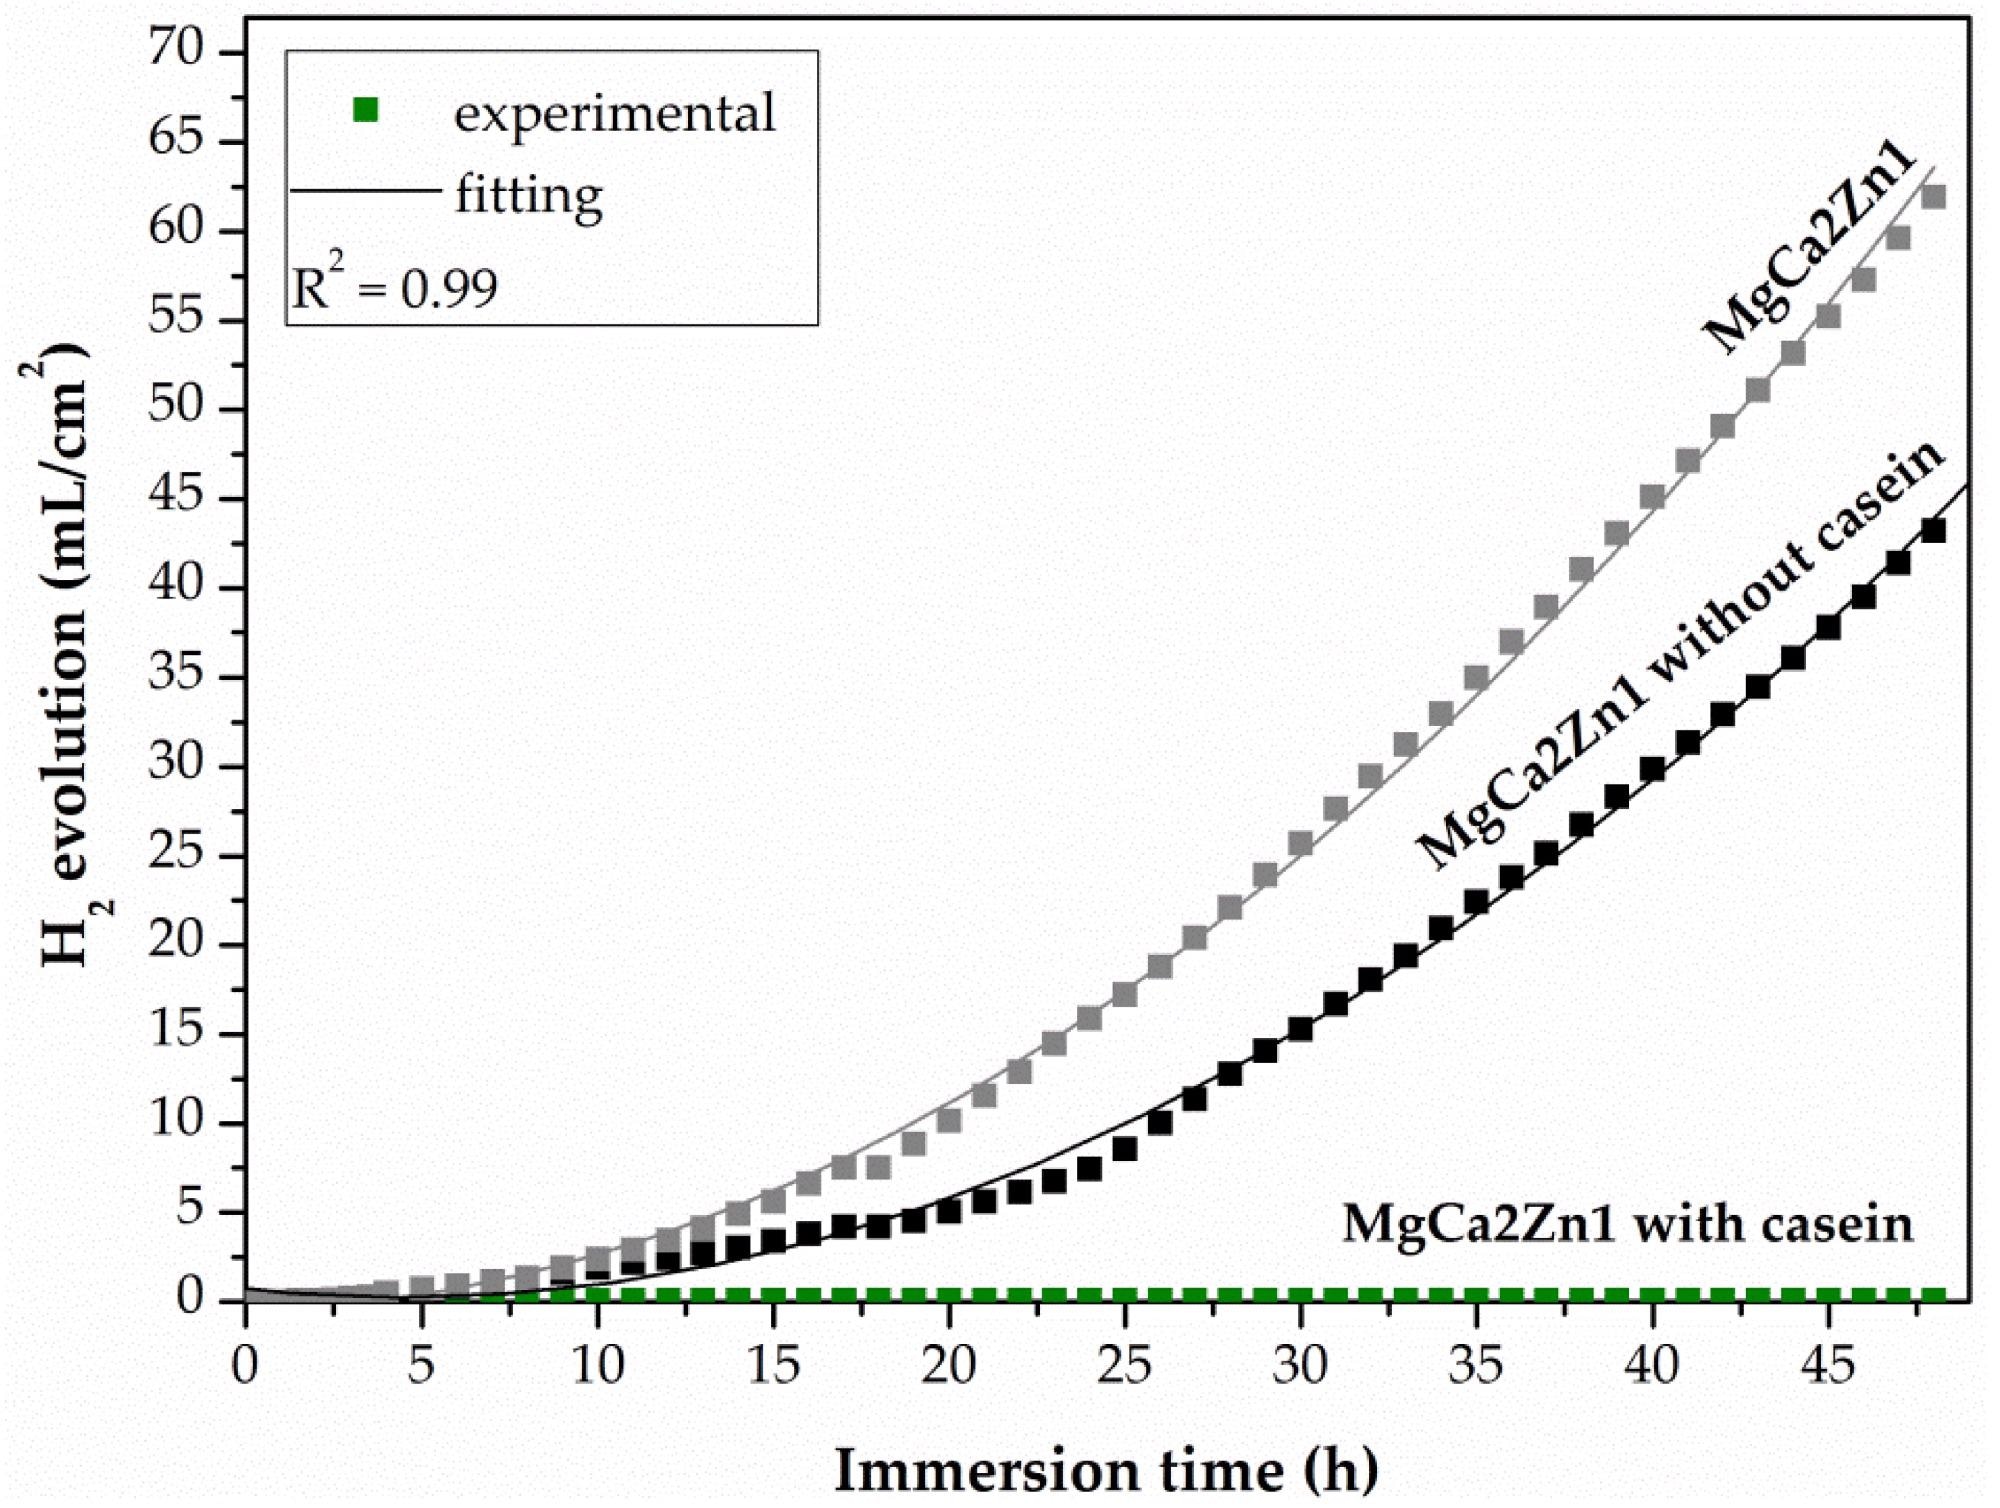 Volume of hydrogen evolution as a function of immersion time in Ringer solution at 37 °C for 48 h for the coatings applied to the MgCa2Zn1 alloy and uncoated alloy.